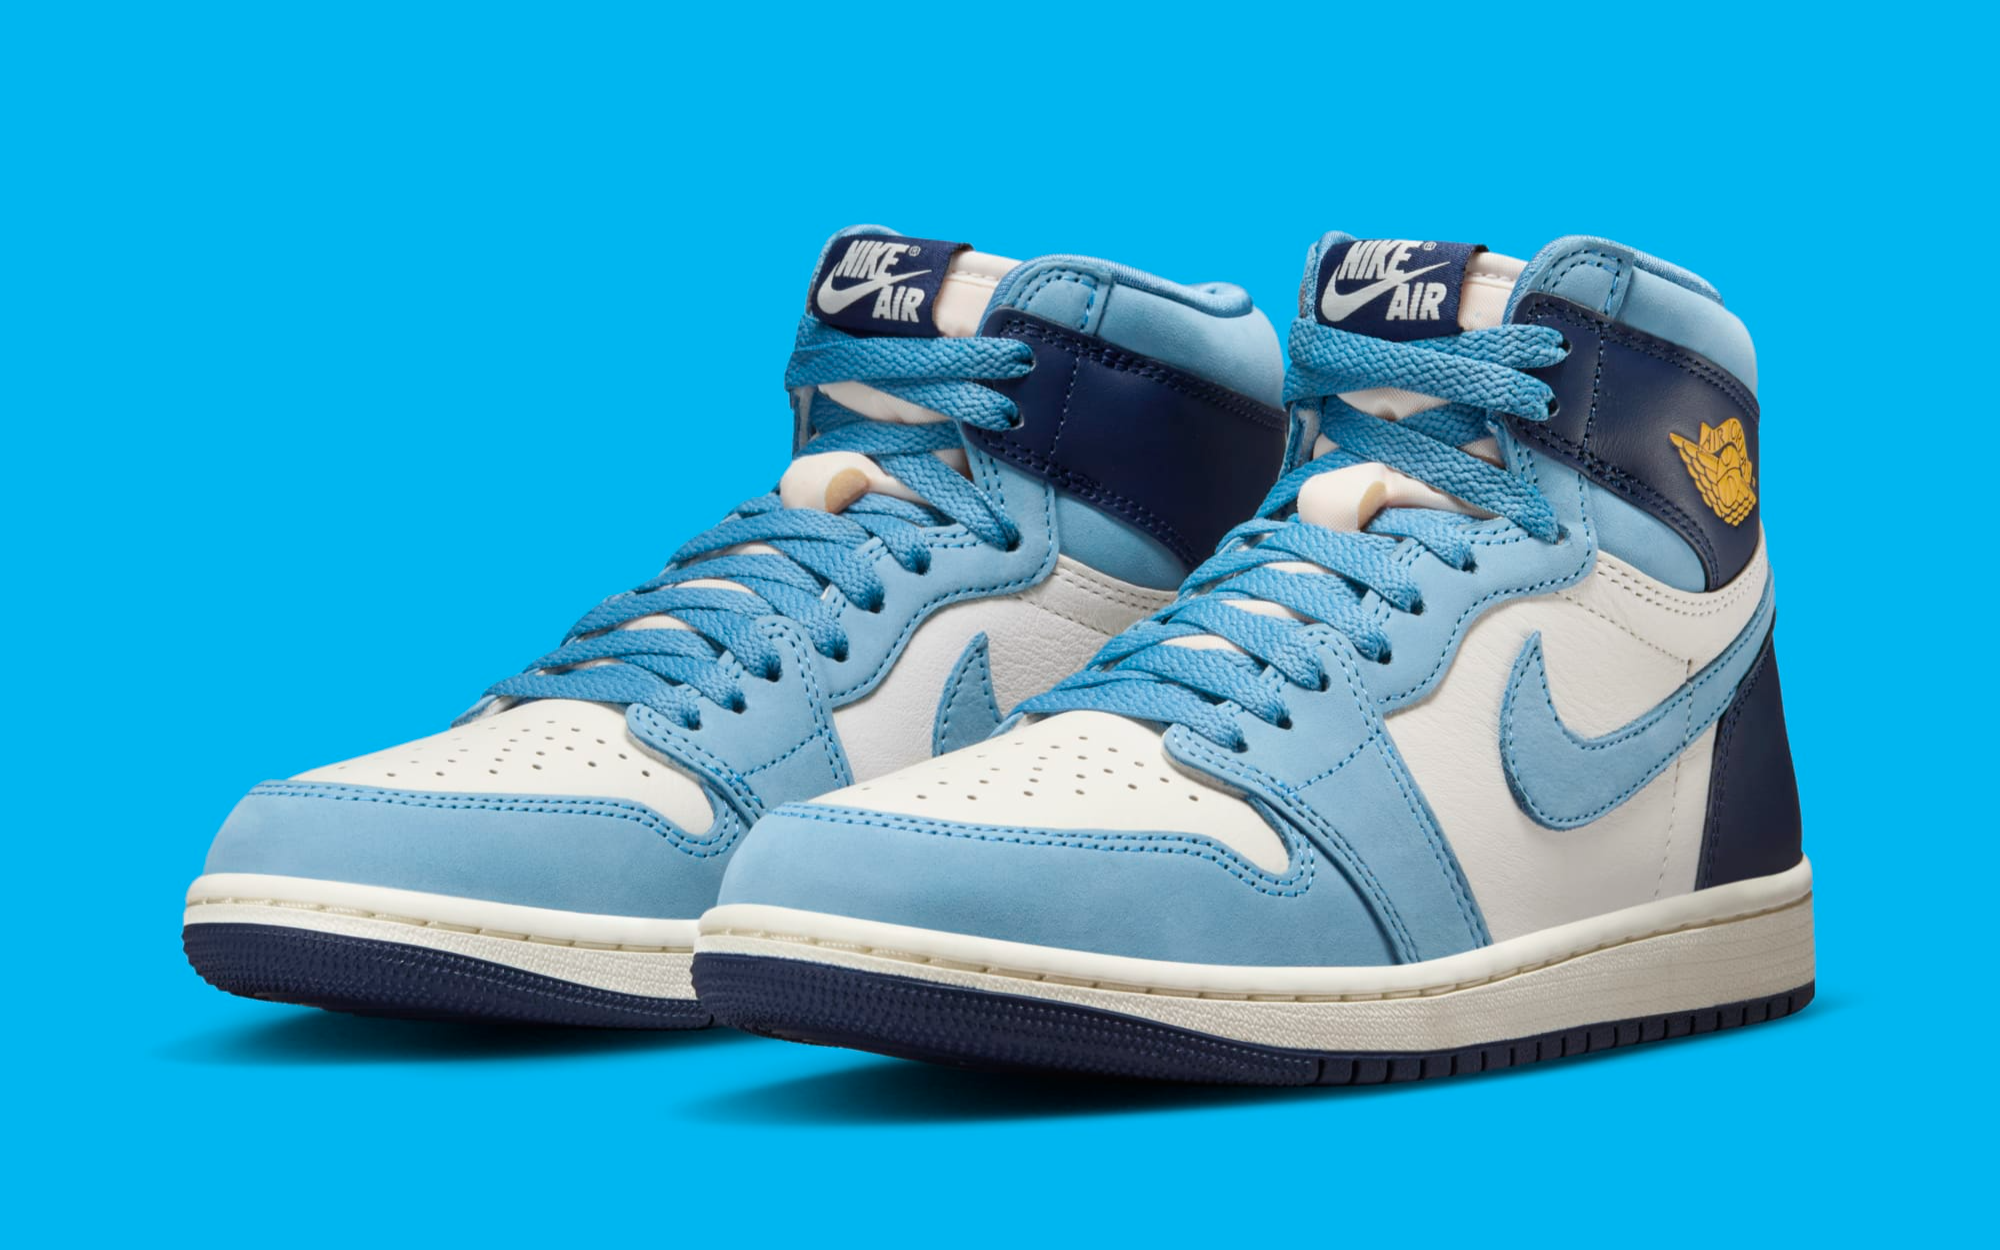 Where to Buy the Air Jordan 1 High OG “First in Flight” | House of Heat°